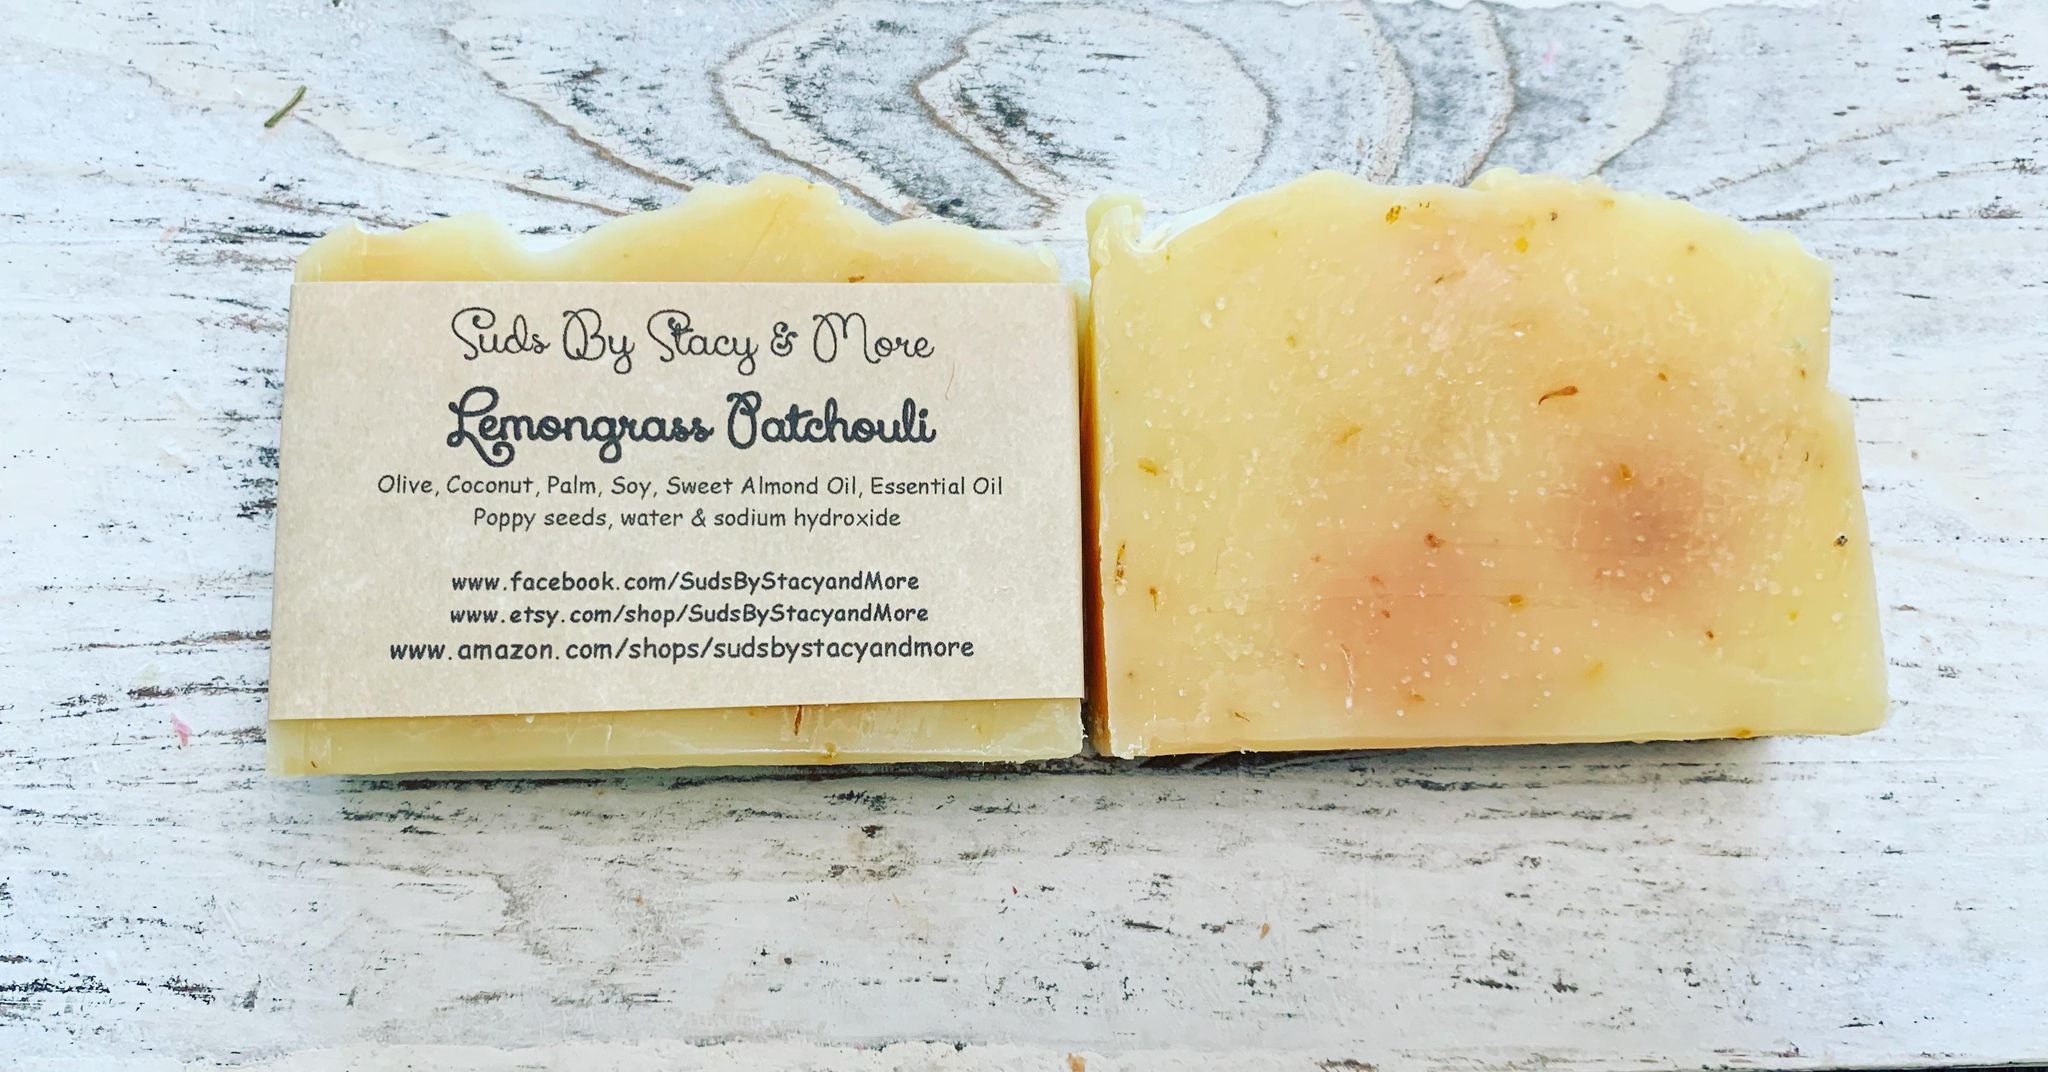 Herb & Scent Soap Stamp: Mint, Sage, Rosemary, Patchouli, Cotton, Hemp,  Lemongrass, Honey Almond, Coffee for Soap Making. Includes Handle. 